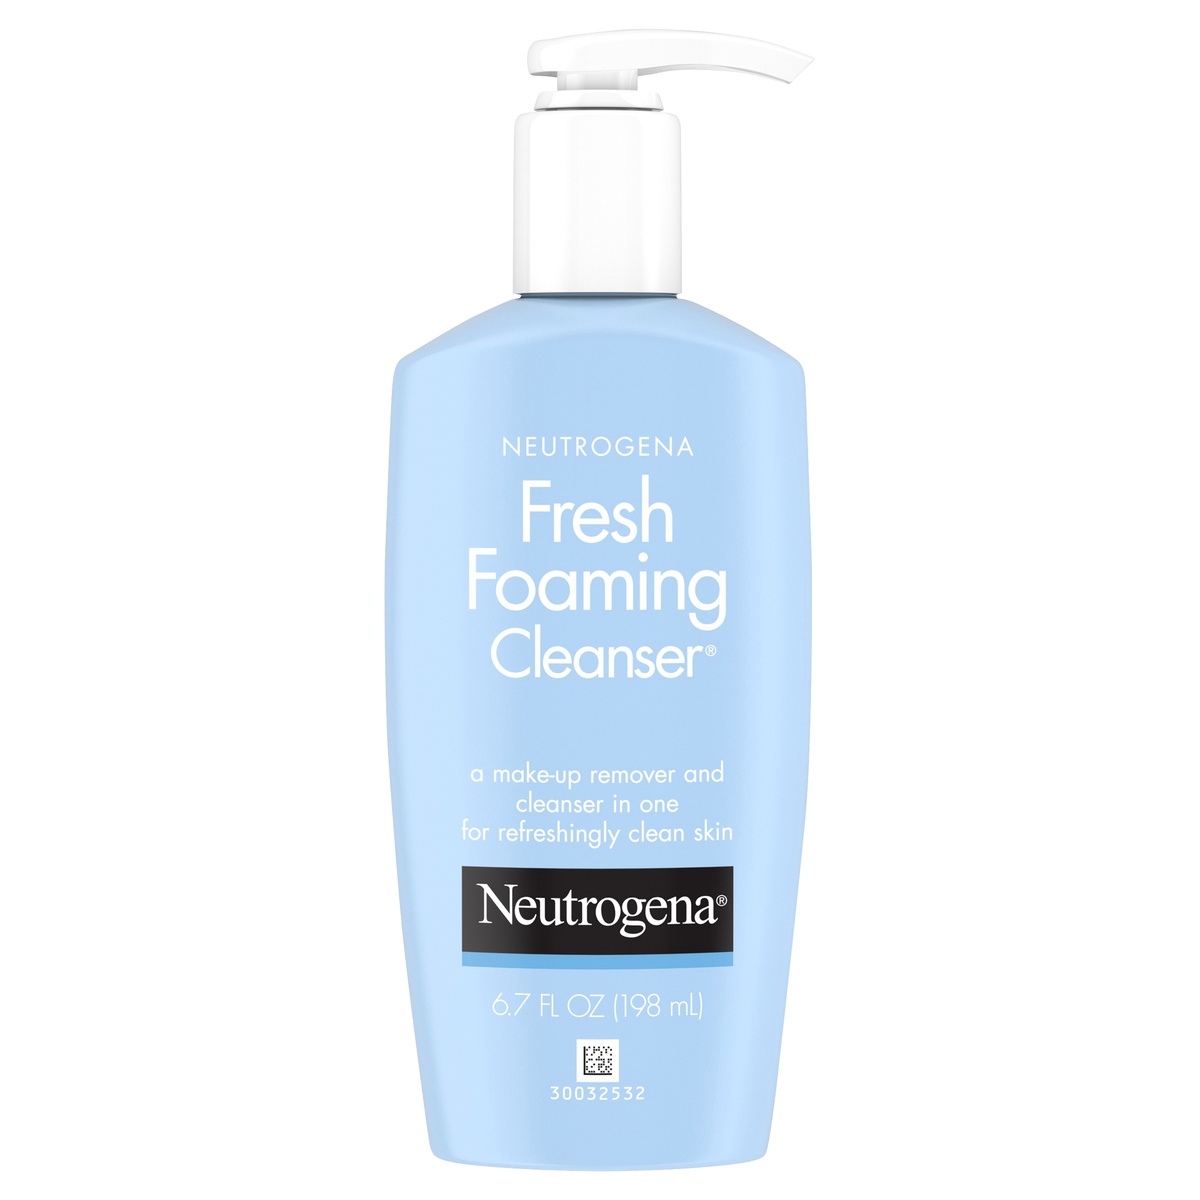 slide 4 of 6, Neutrogena Fresh Foaming Facial Cleanser & Makeup Remover with Glycerin, Oil-, Soap- & Alcohol-Free Daily Face Wash Removes Dirt, Oil & Waterproof Makeup, Non-Comedogenic & Hypoallergenic, 6.7 fl oz